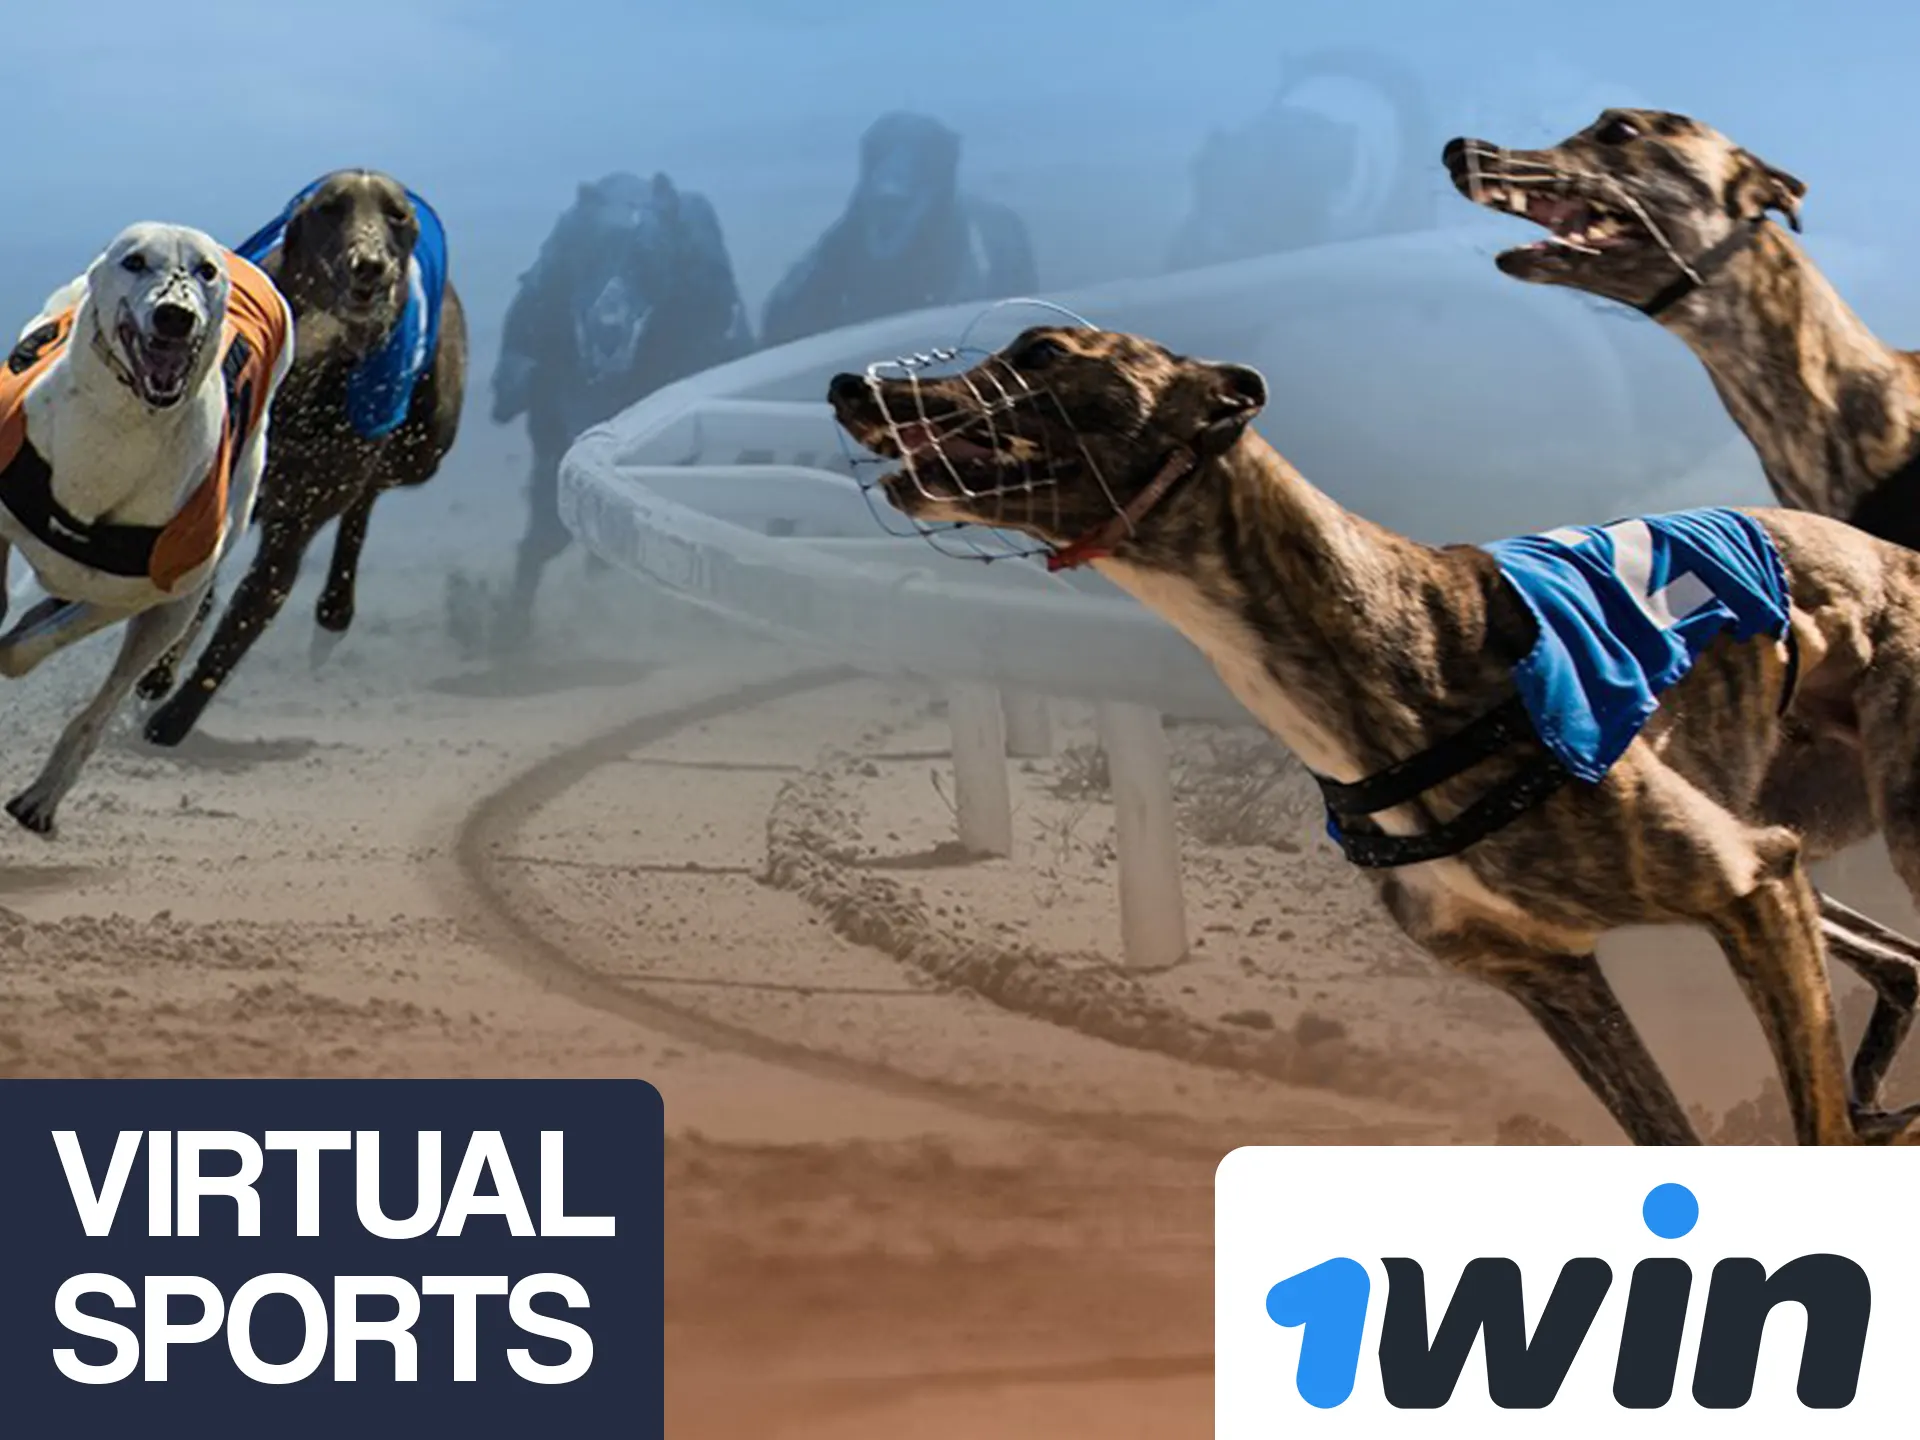 Bet on most exotic virtual sports at 1win.